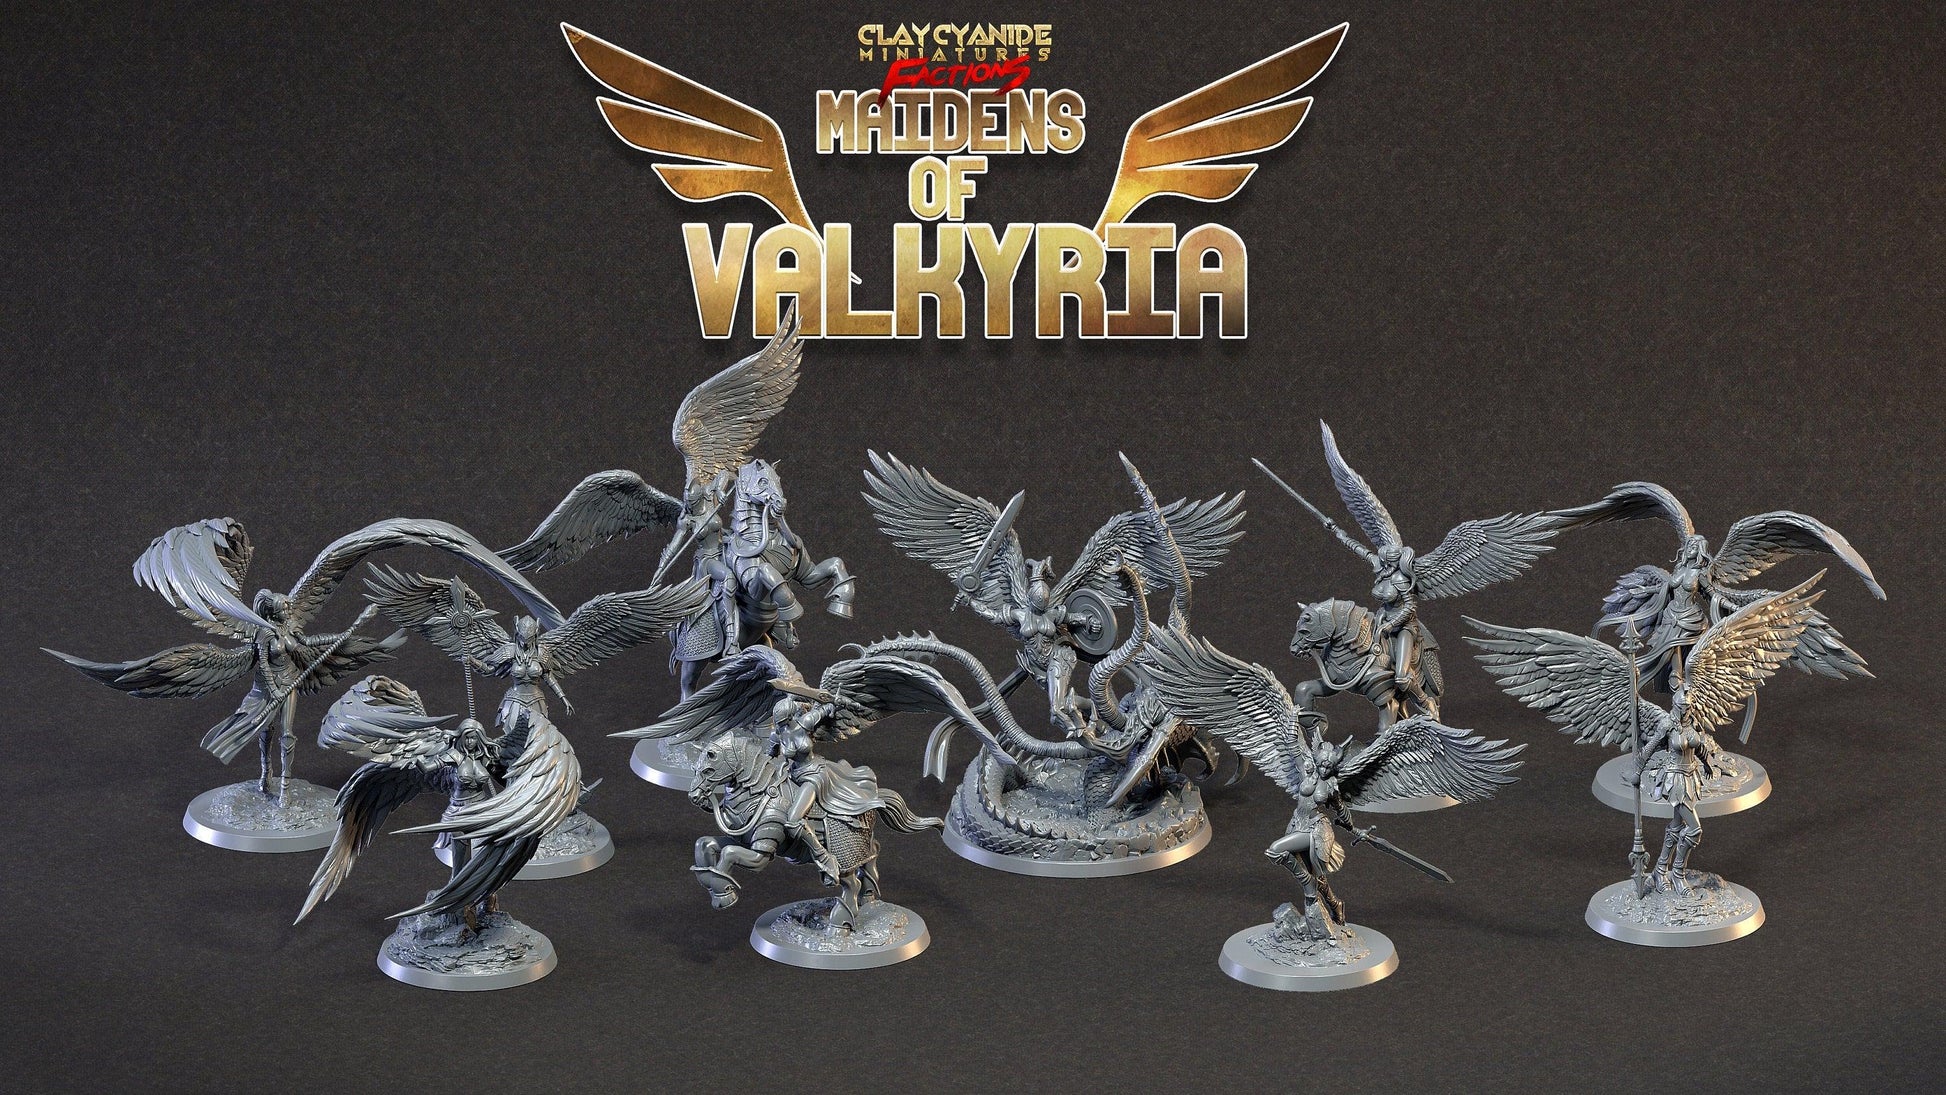 Viking Valkyrie Miniature | Skuld Clay Cyanide | Maidens of Valkyria | Tabletop Gaming | DnD Miniature | Dungeons and Dragons - Plague Miniatures shop for DnD Miniatures